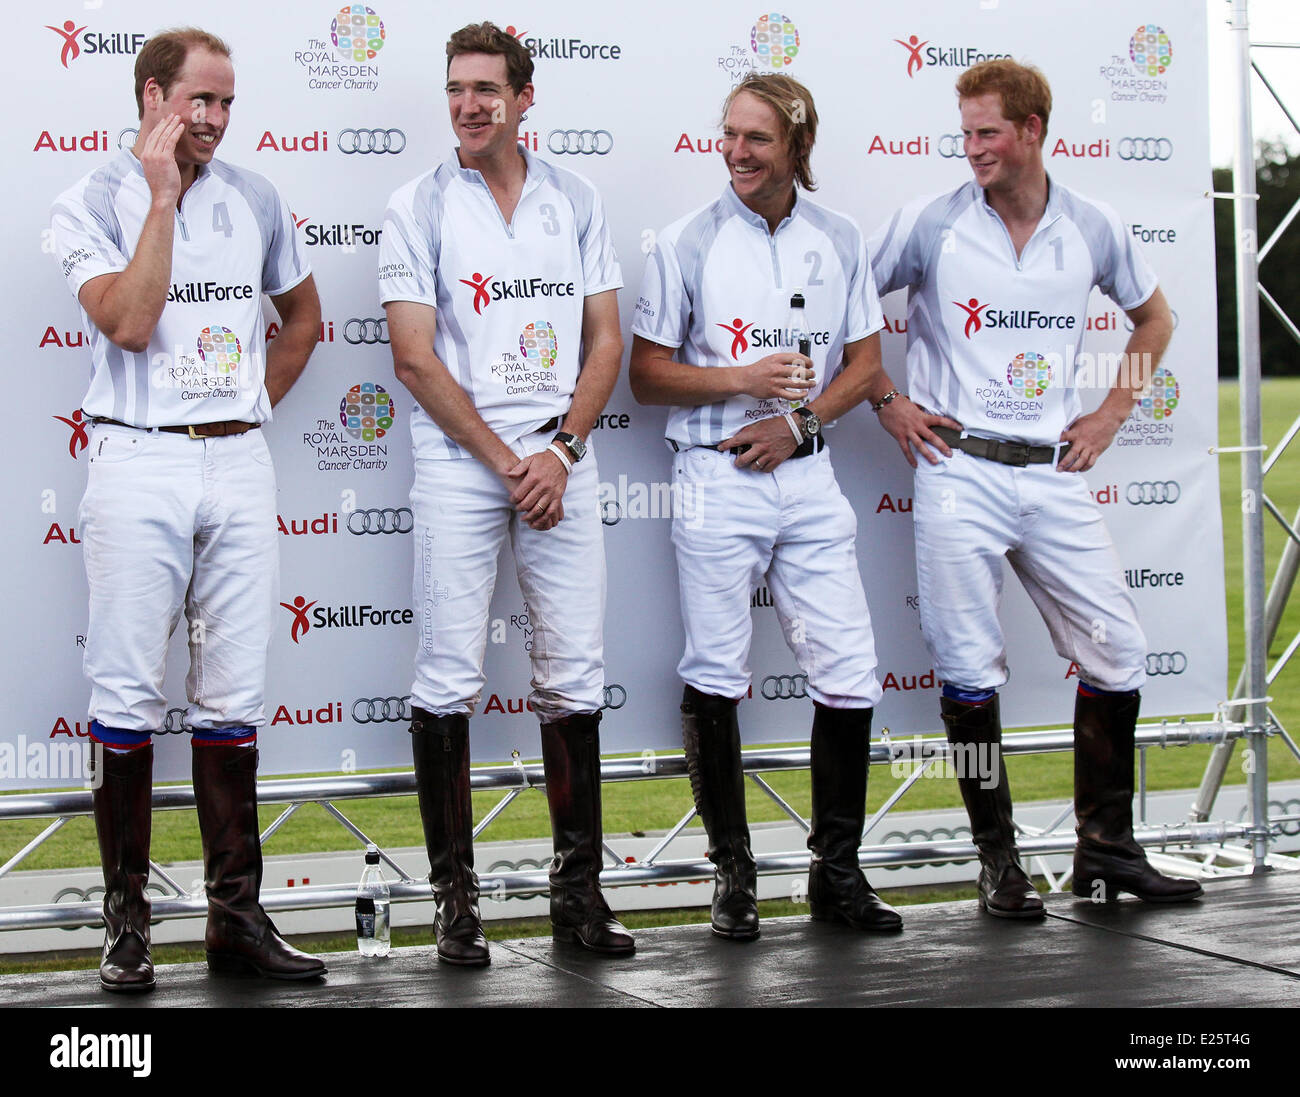 Britain's Prince WIlliam and Prince Harry play a charity polo match at the Audi Polo Challenge, Coworth Park, Berkshire, The match is in aid of the charities SkillForce and The Royal Marsden Cancer Charity, of which The Duke of Cambridge is Patron and President respectively.  Featuring: Prince WIlliam,Prince Harry Where: Windsor, Royaume Uni When: 03 Aug 2013 Stock Photo